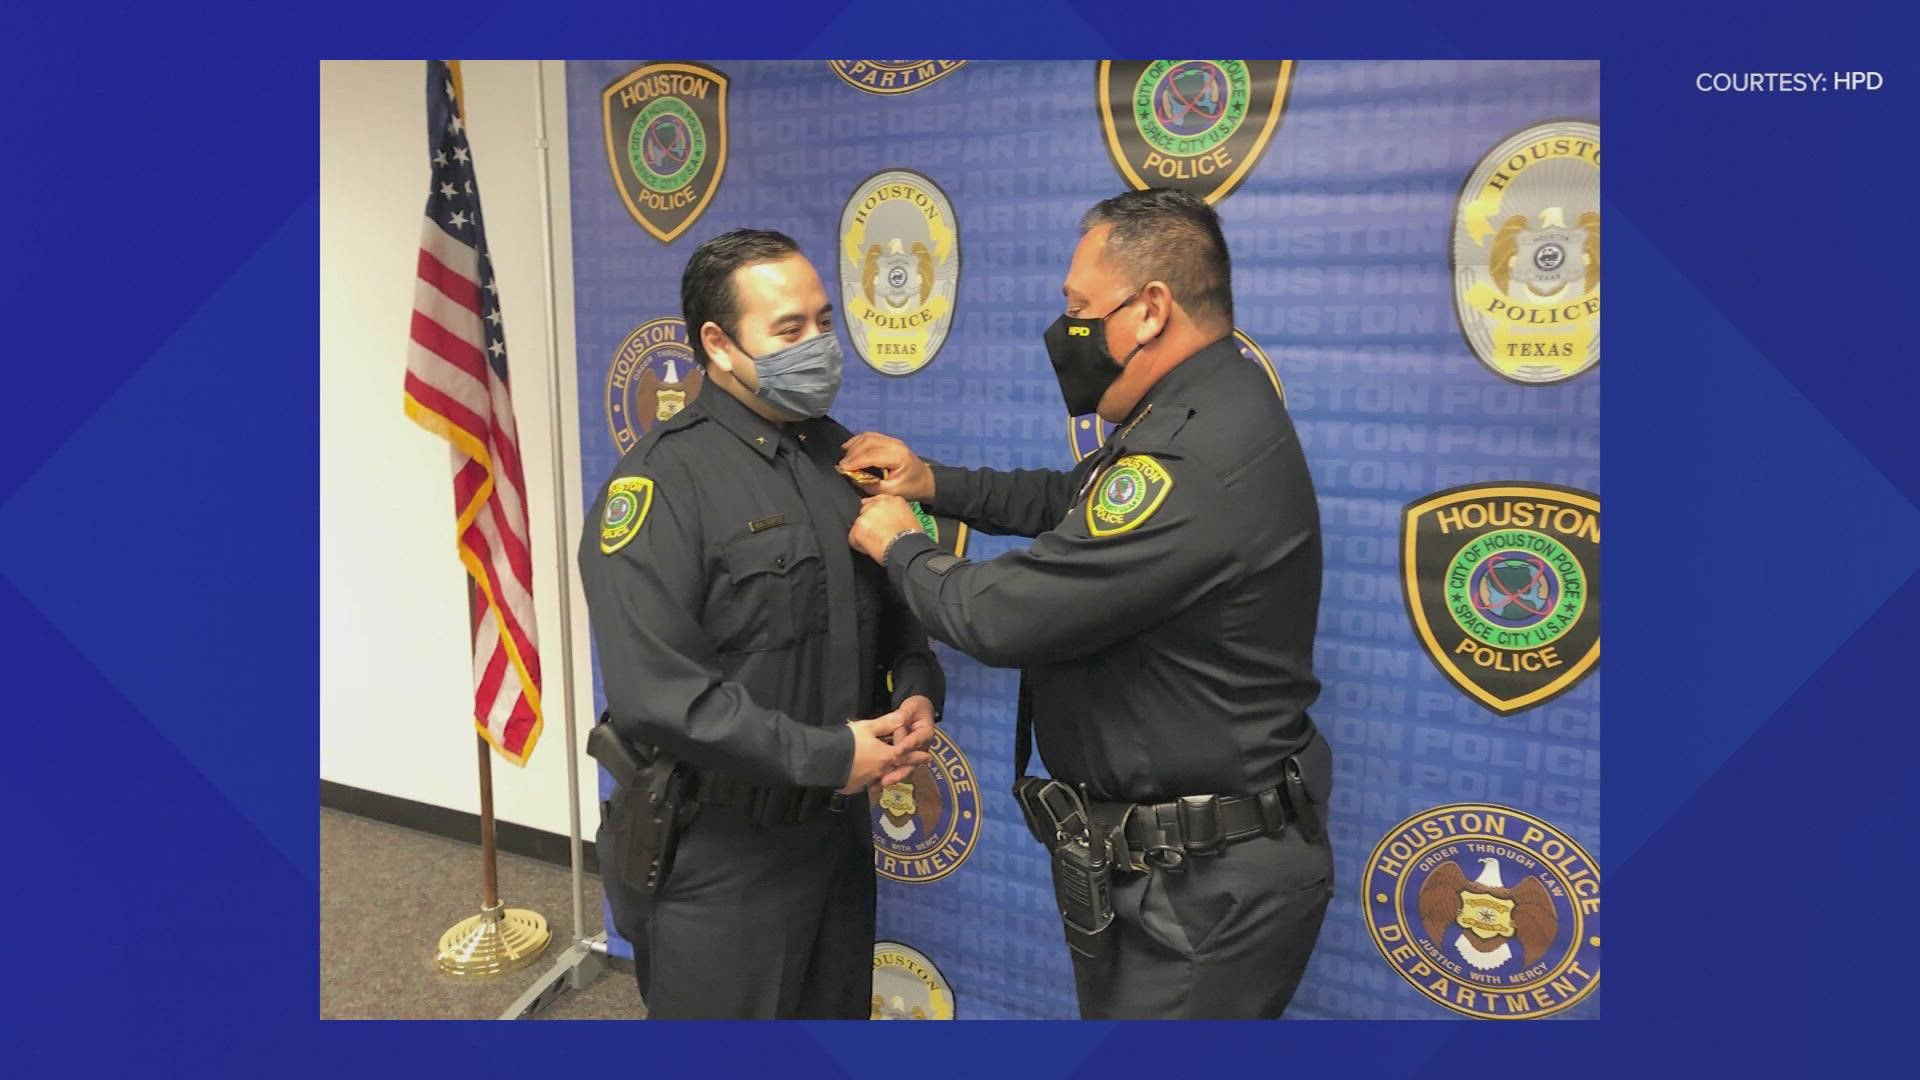 HPD Chief Troy Finner identified the officer as Vidal Lopez, a 20-year veteran of the force who currently works in the Technology Services department.